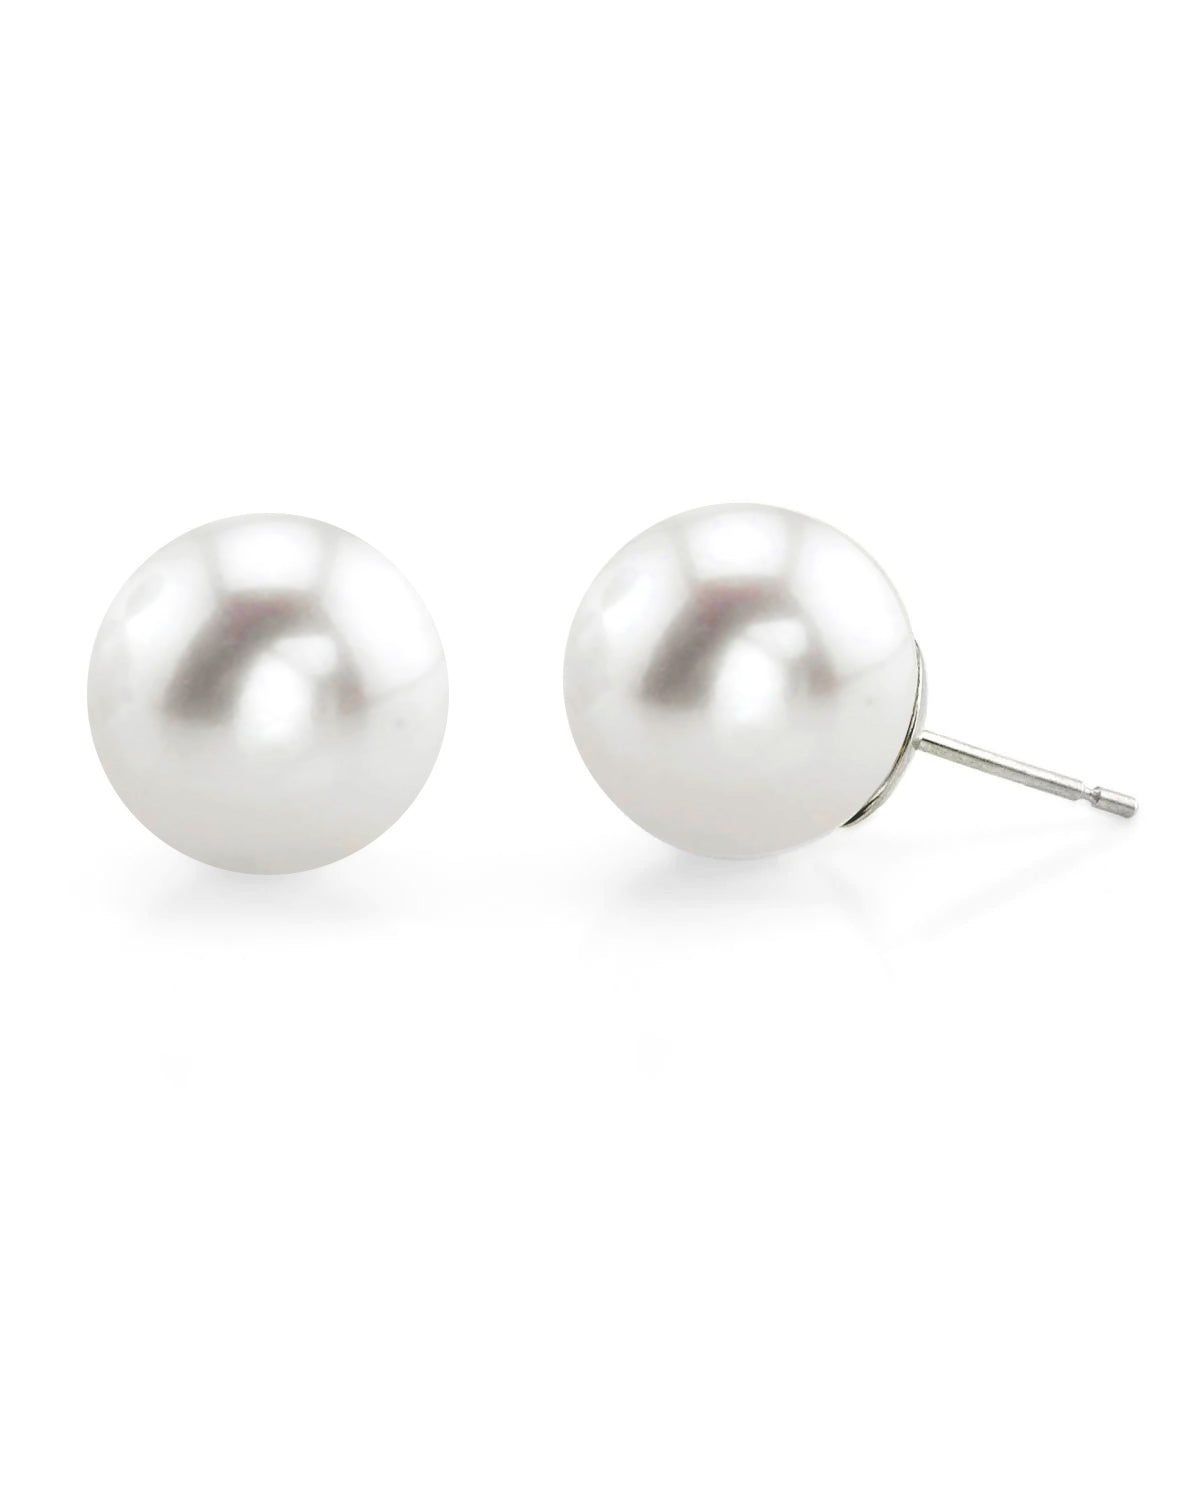 White South Sea Round Pearl Stud Earrings, 10.0-11.0mm